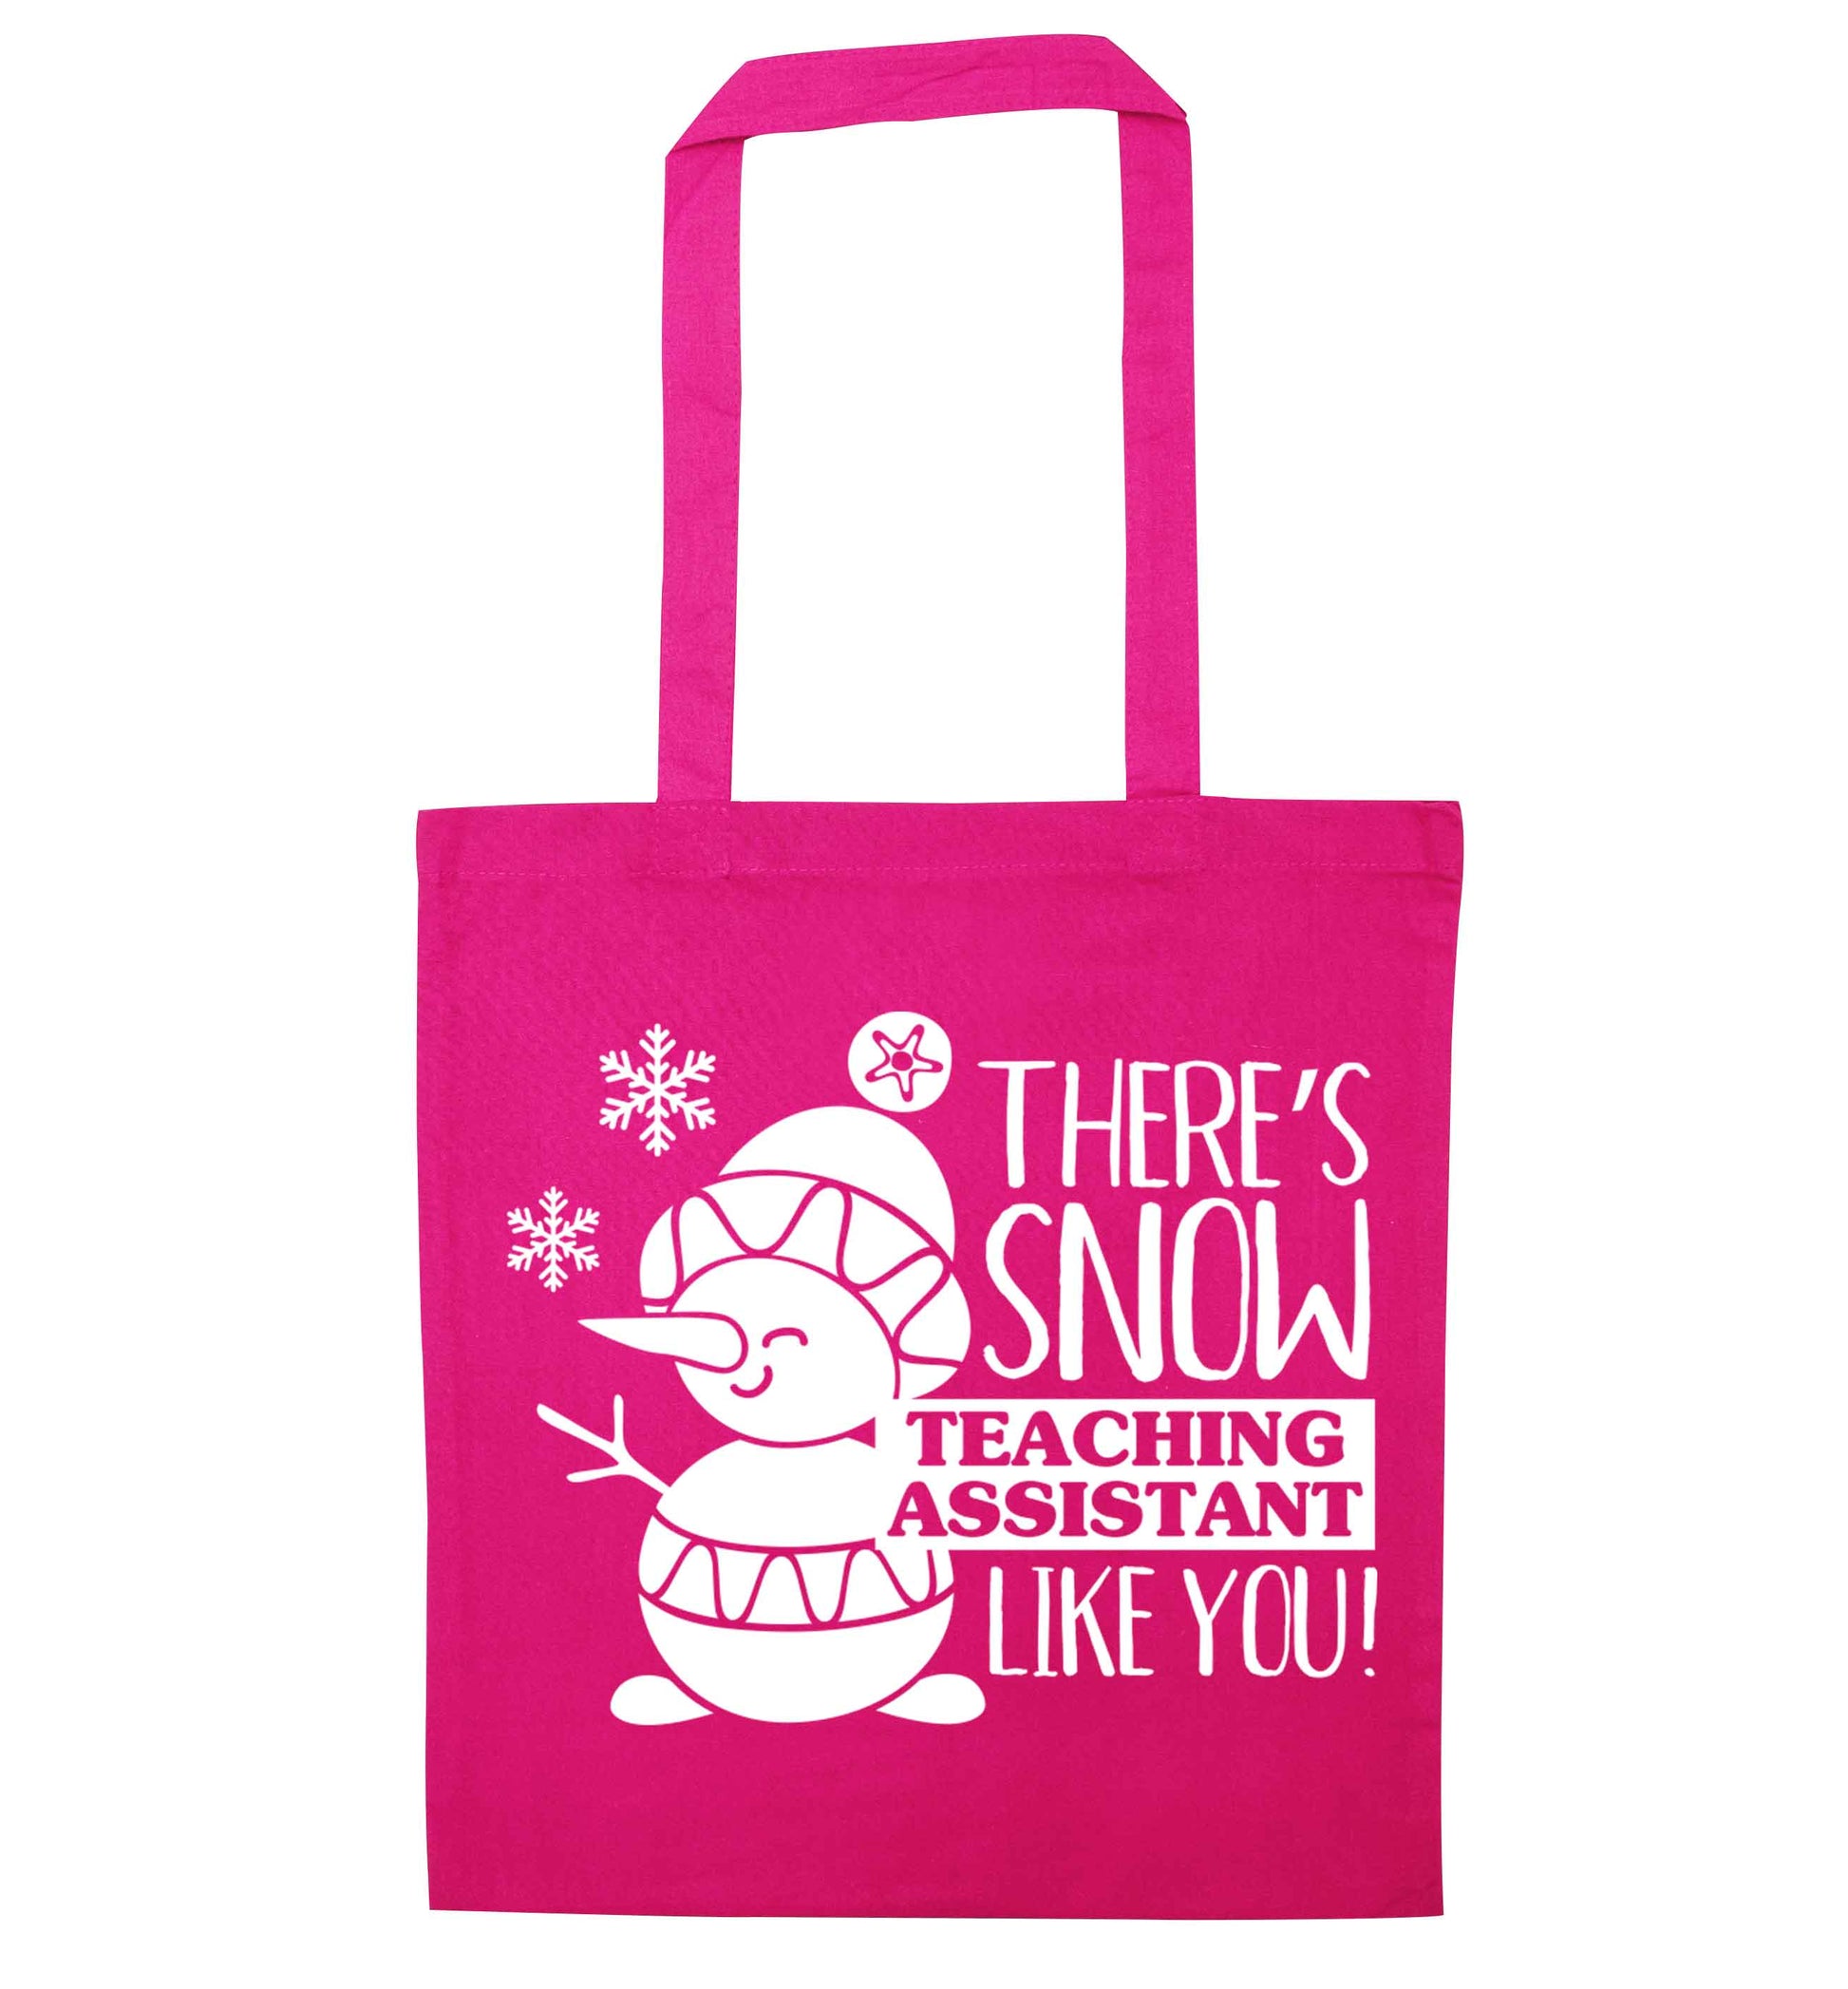 There's snow teaching assistant like you pink tote bag